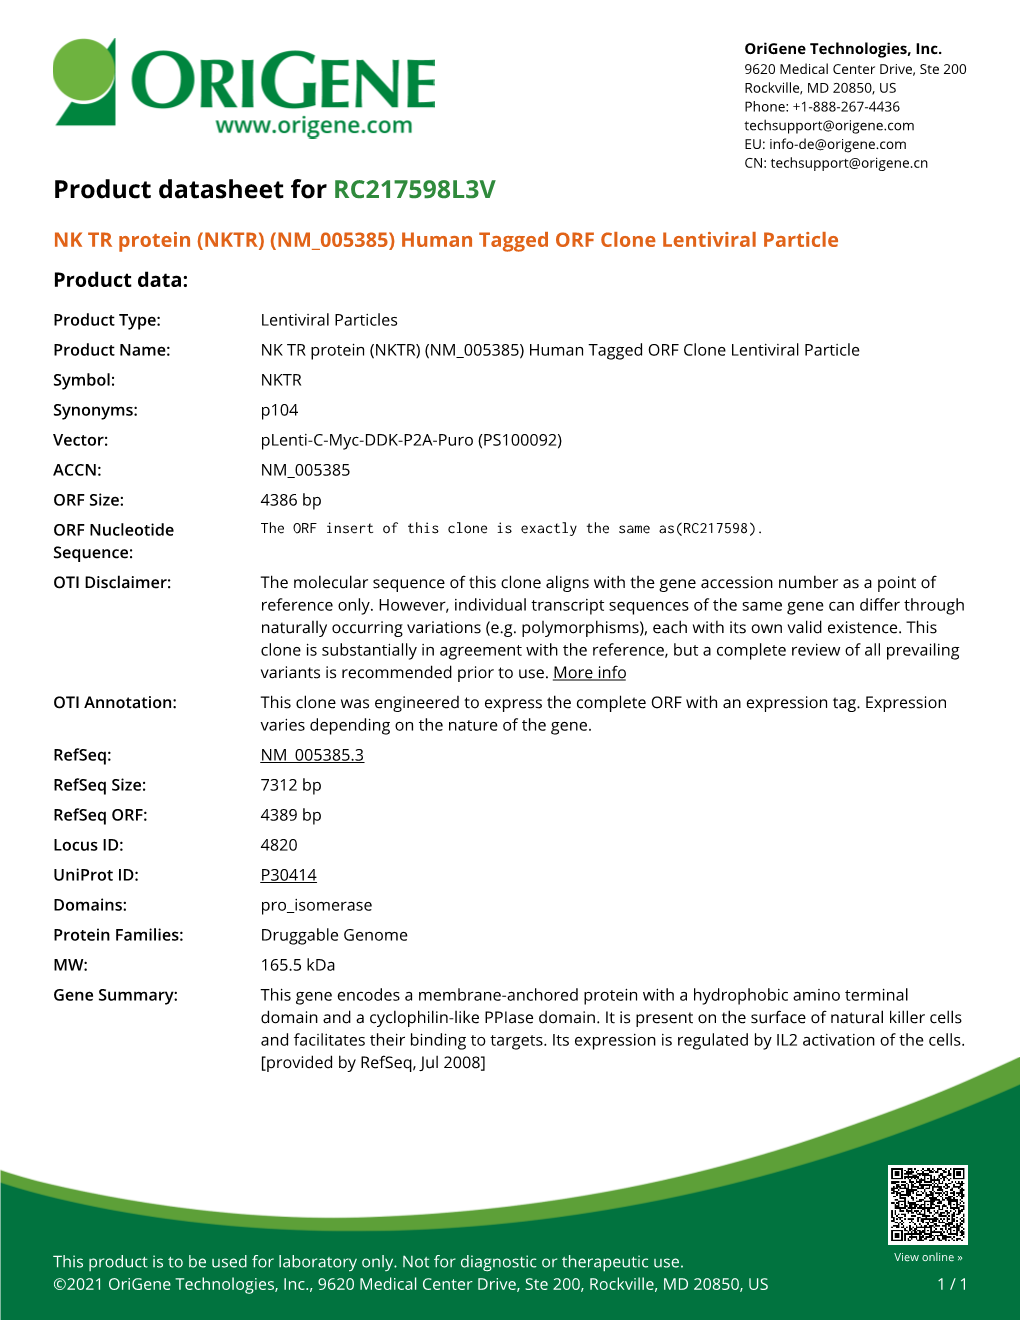 NK TR Protein (NKTR) (NM 005385) Human Tagged ORF Clone Lentiviral Particle Product Data